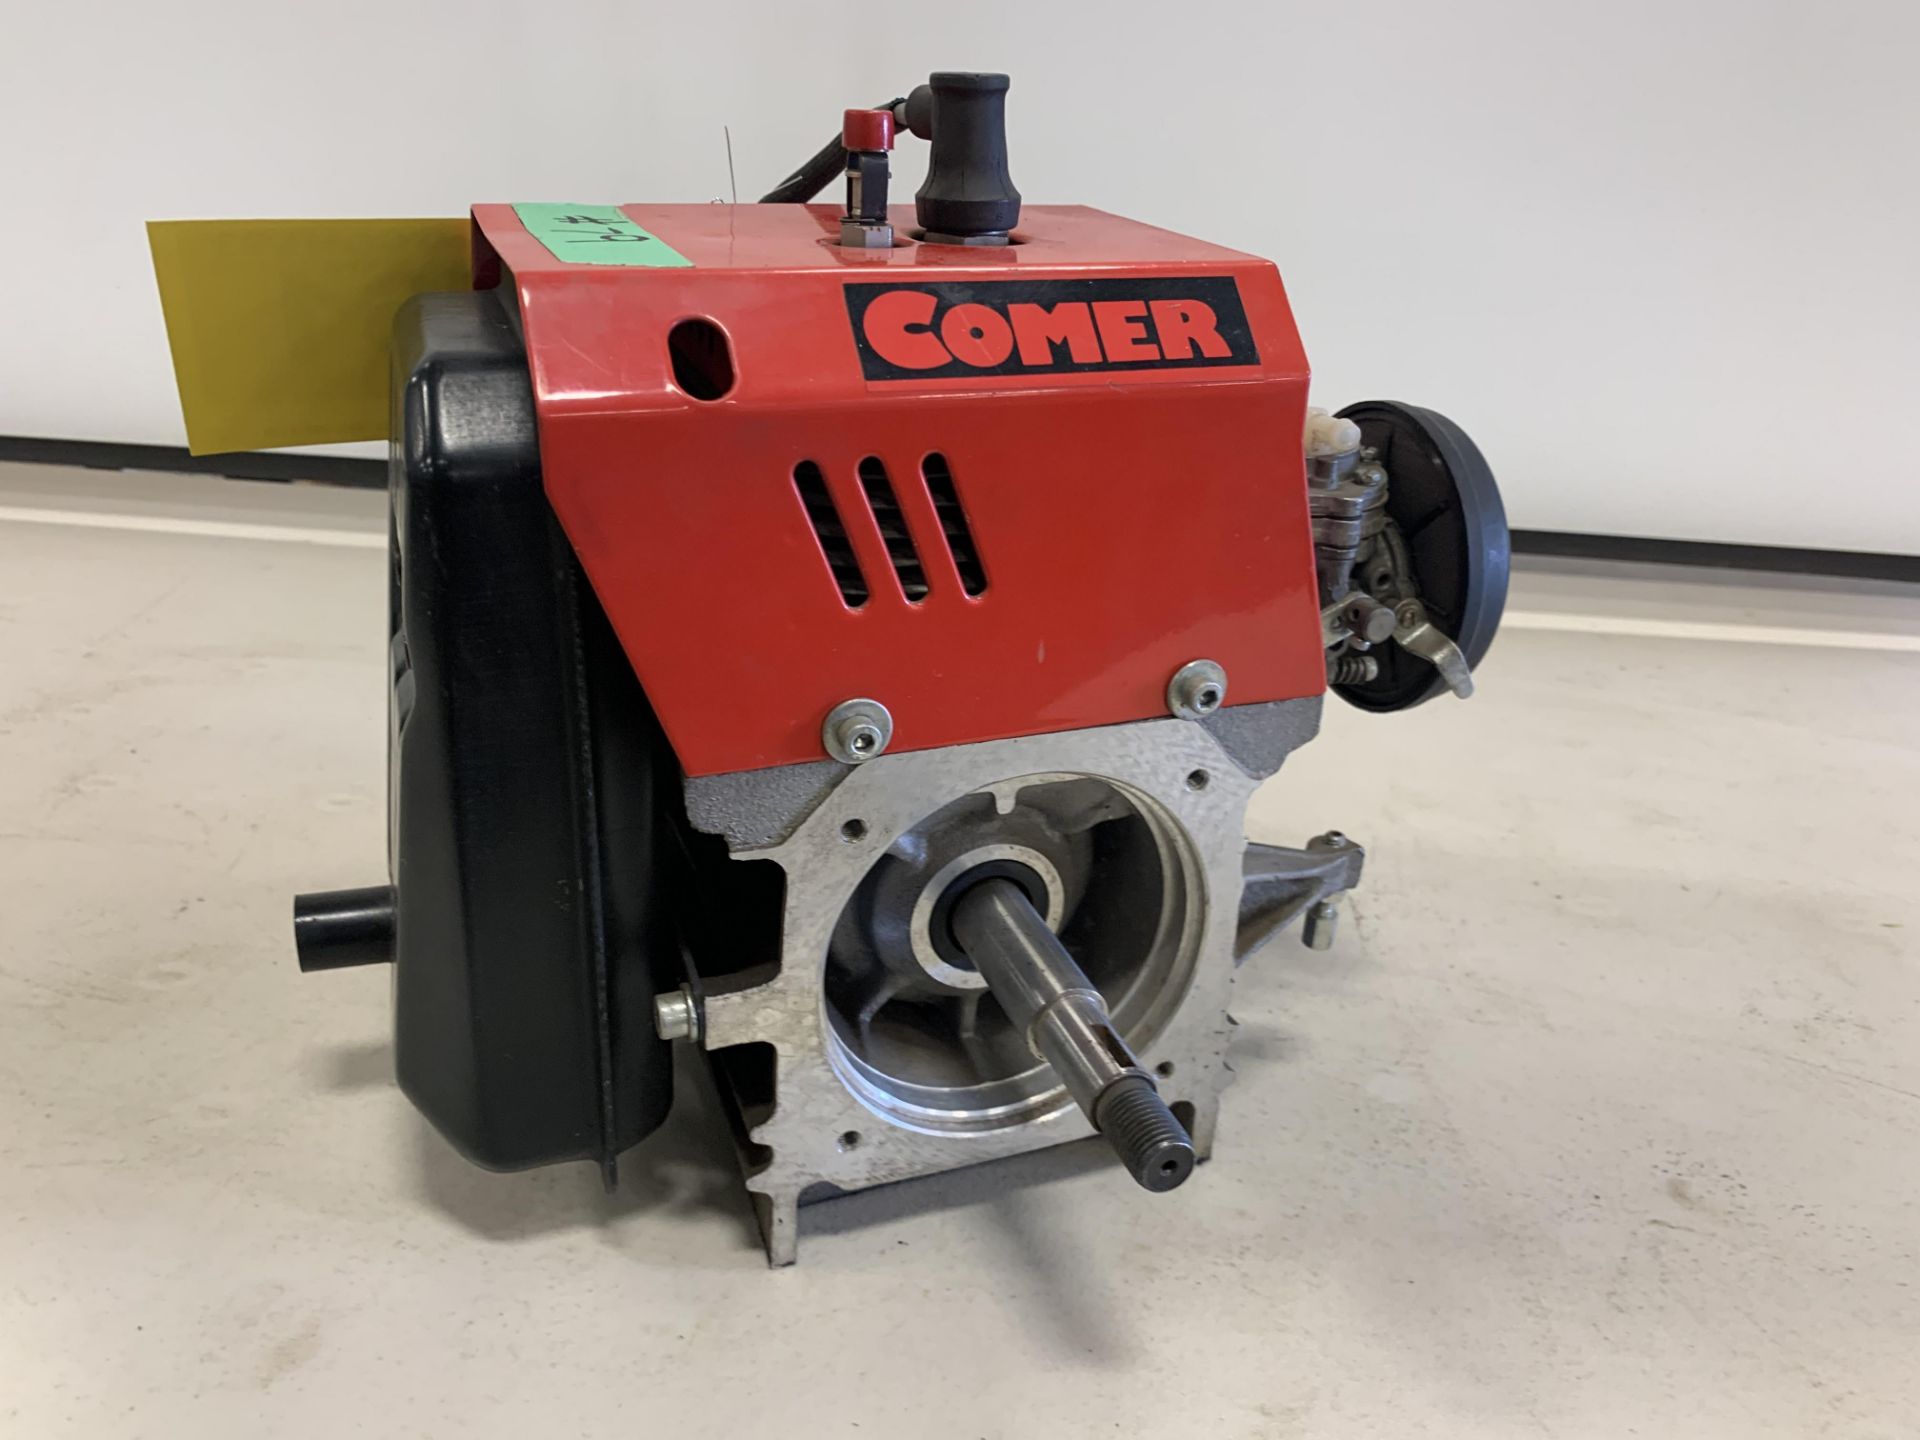 1 – COMER TWO STROKE GO-CART MOTOR, 8HP - 79 - Image 2 of 3